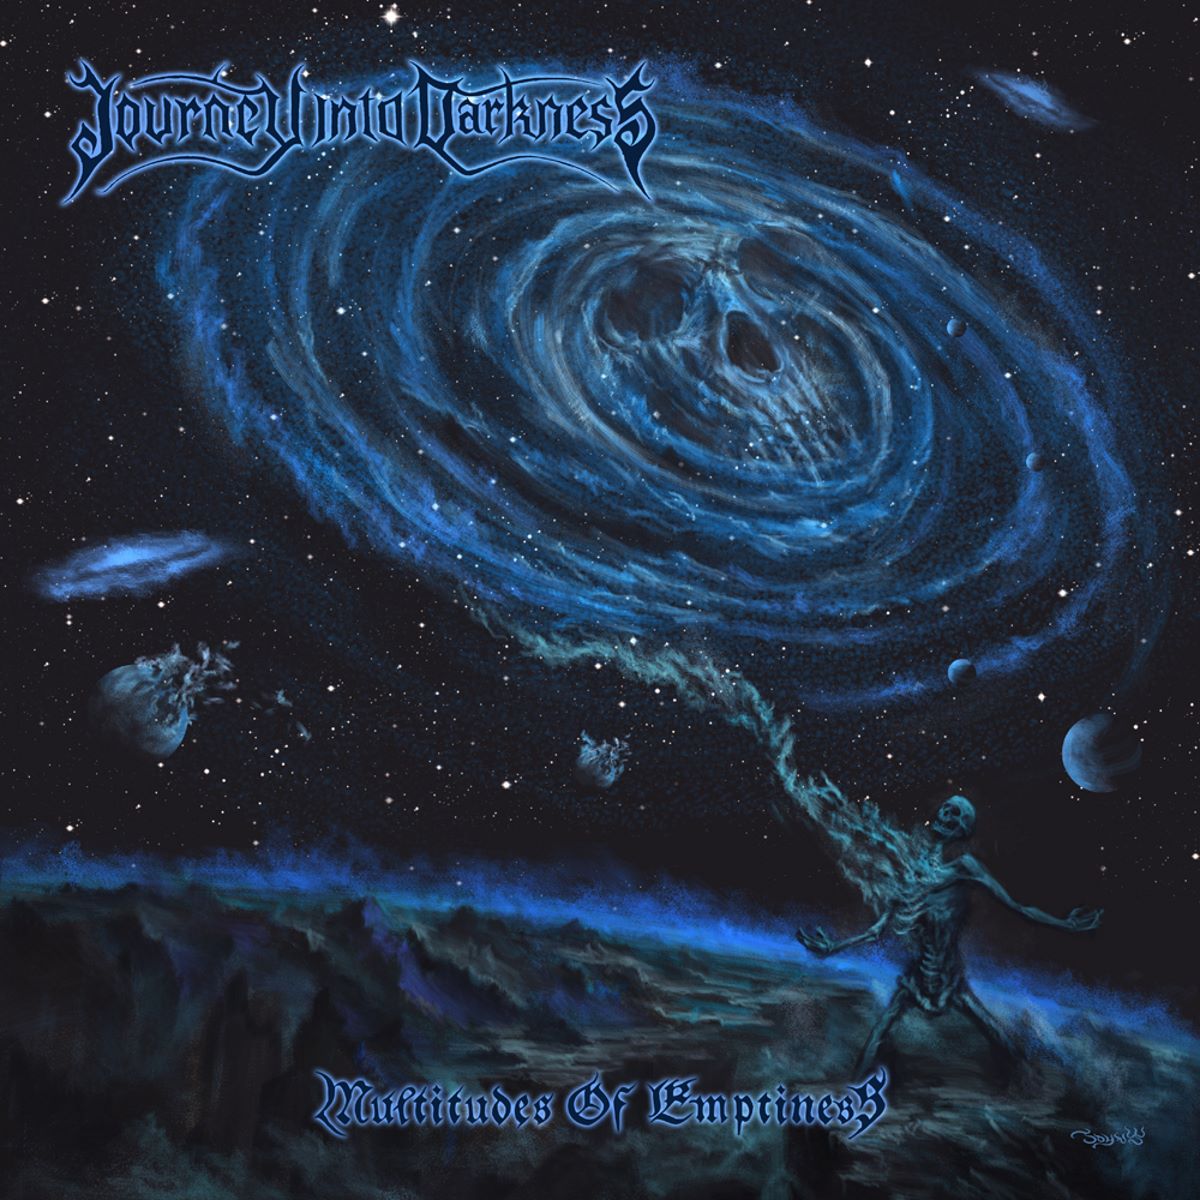 Journey Into Darkness – Multitudes of Emptiness - album cover